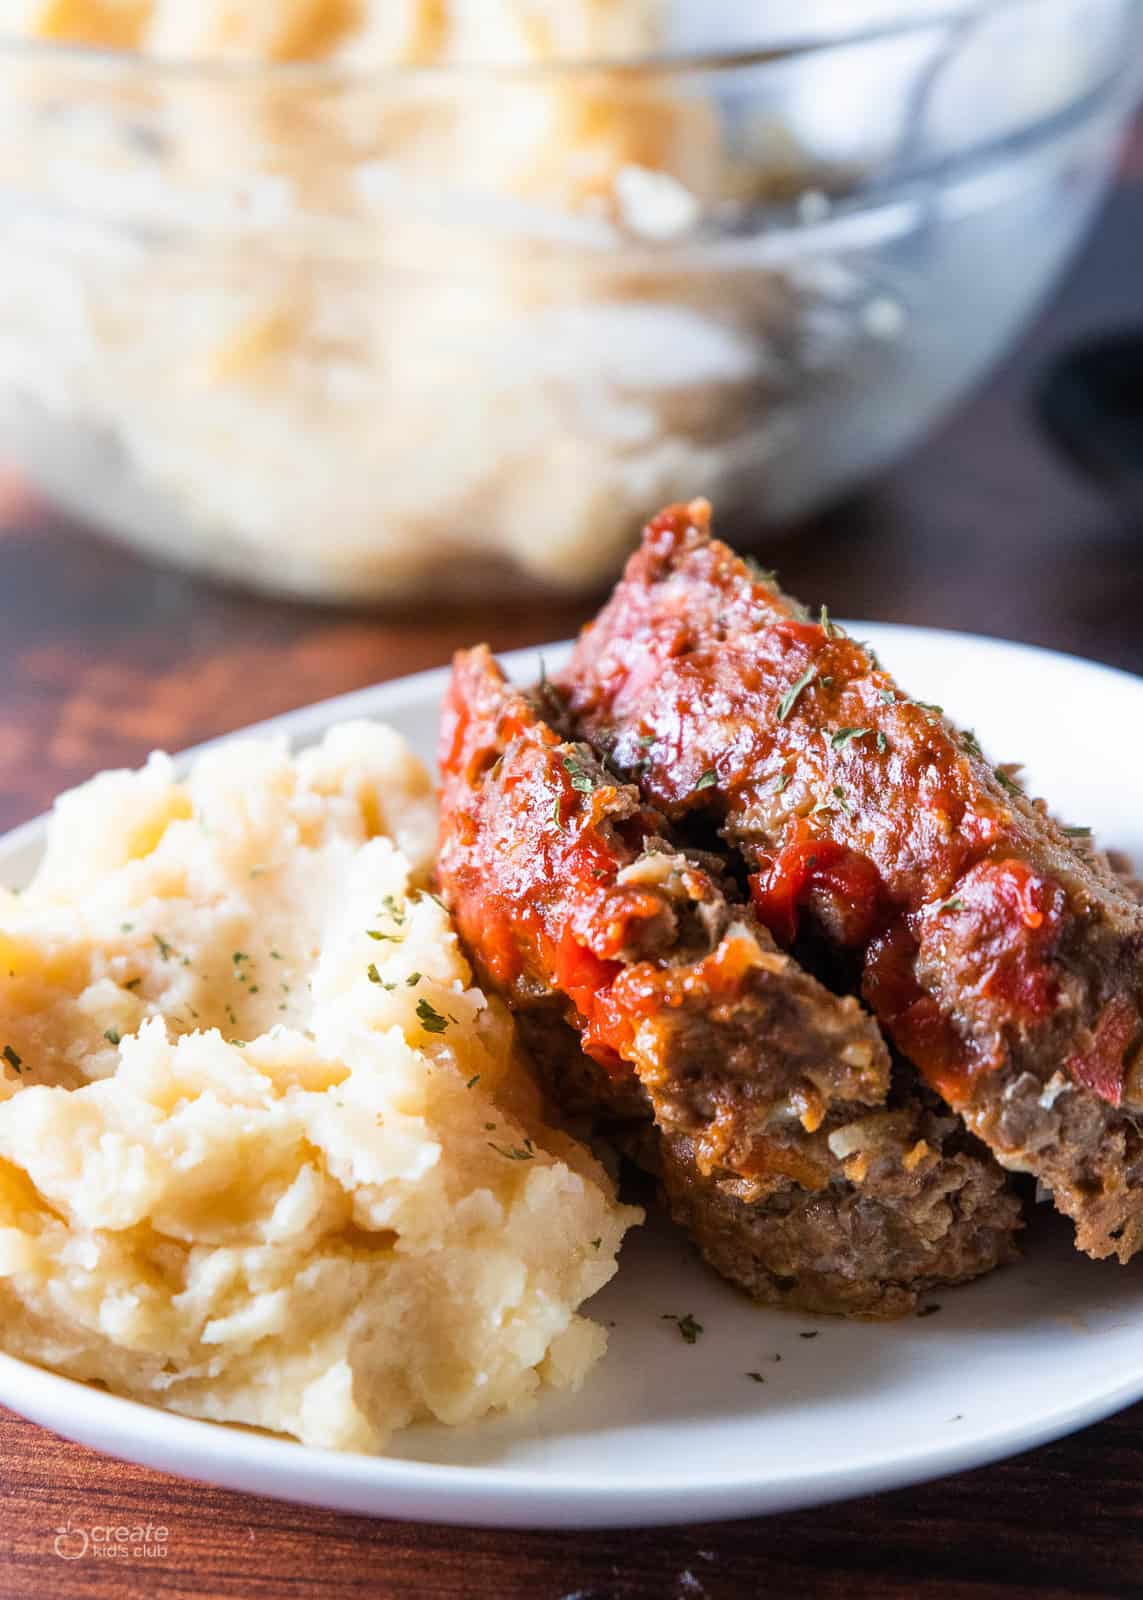 meatloaf on plate with mashed potatoes